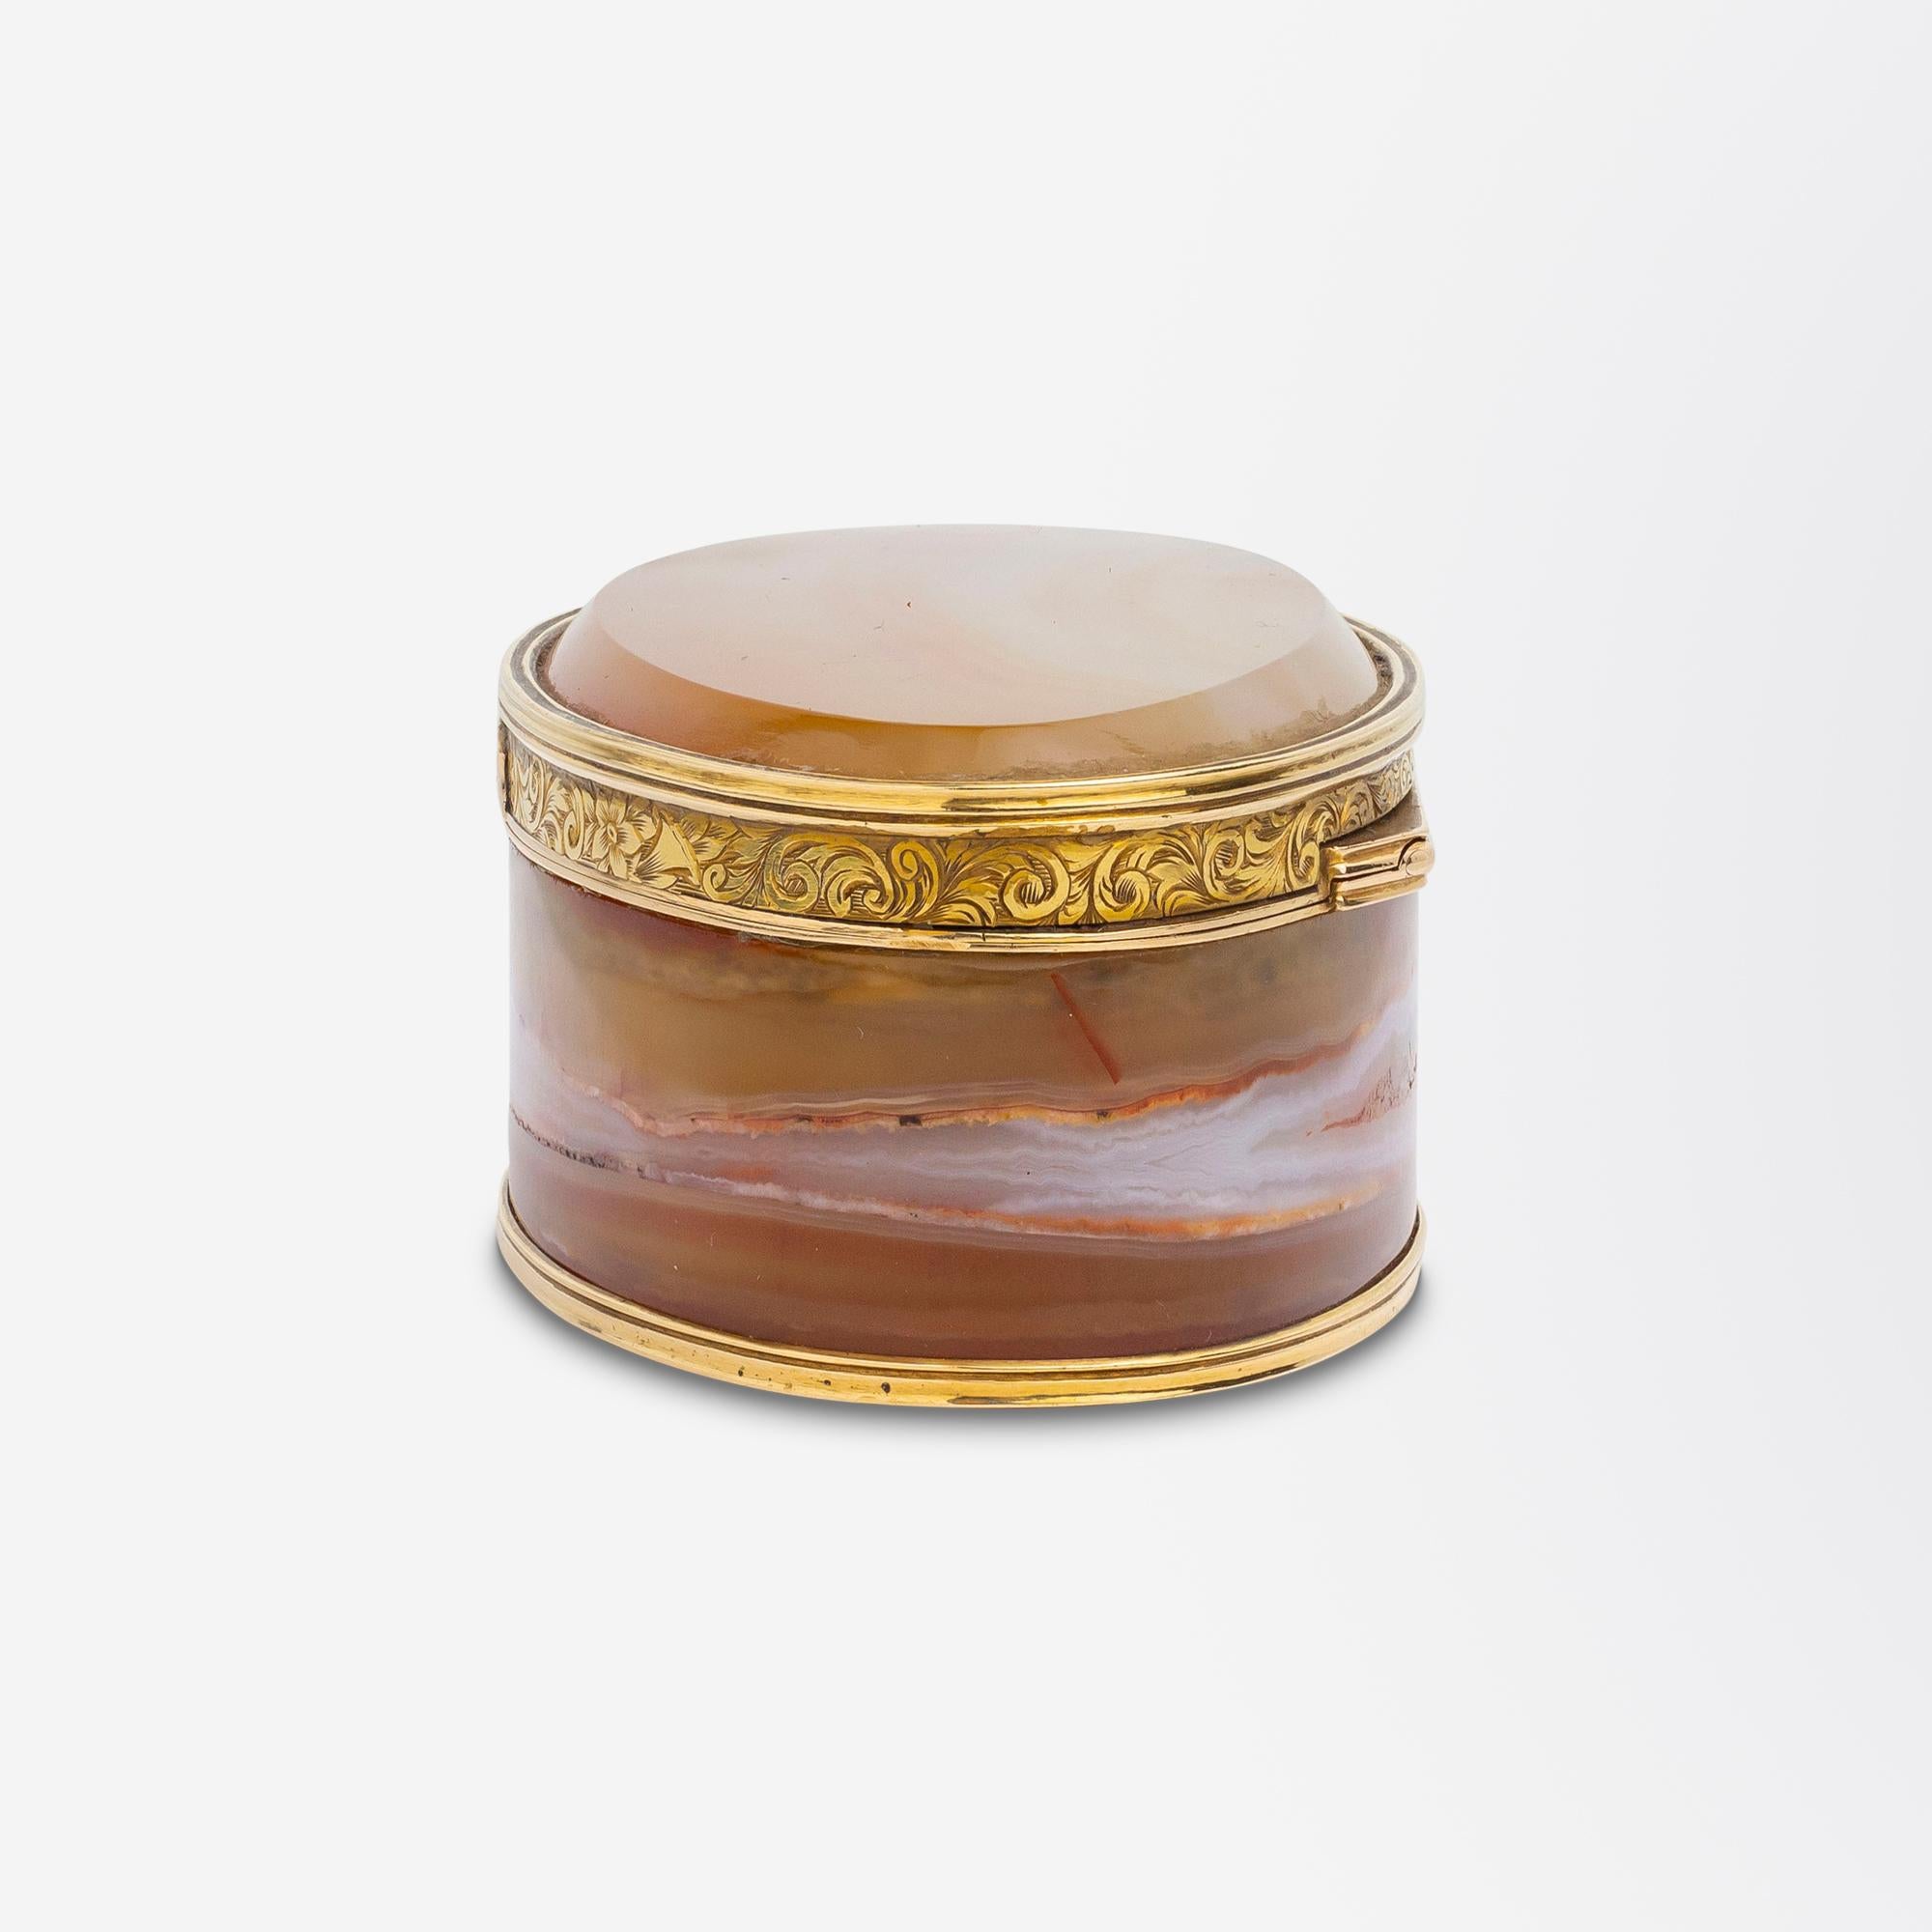 Oval Carnelian Agate Box With Gold Mounts In Good Condition In Brisbane City, QLD